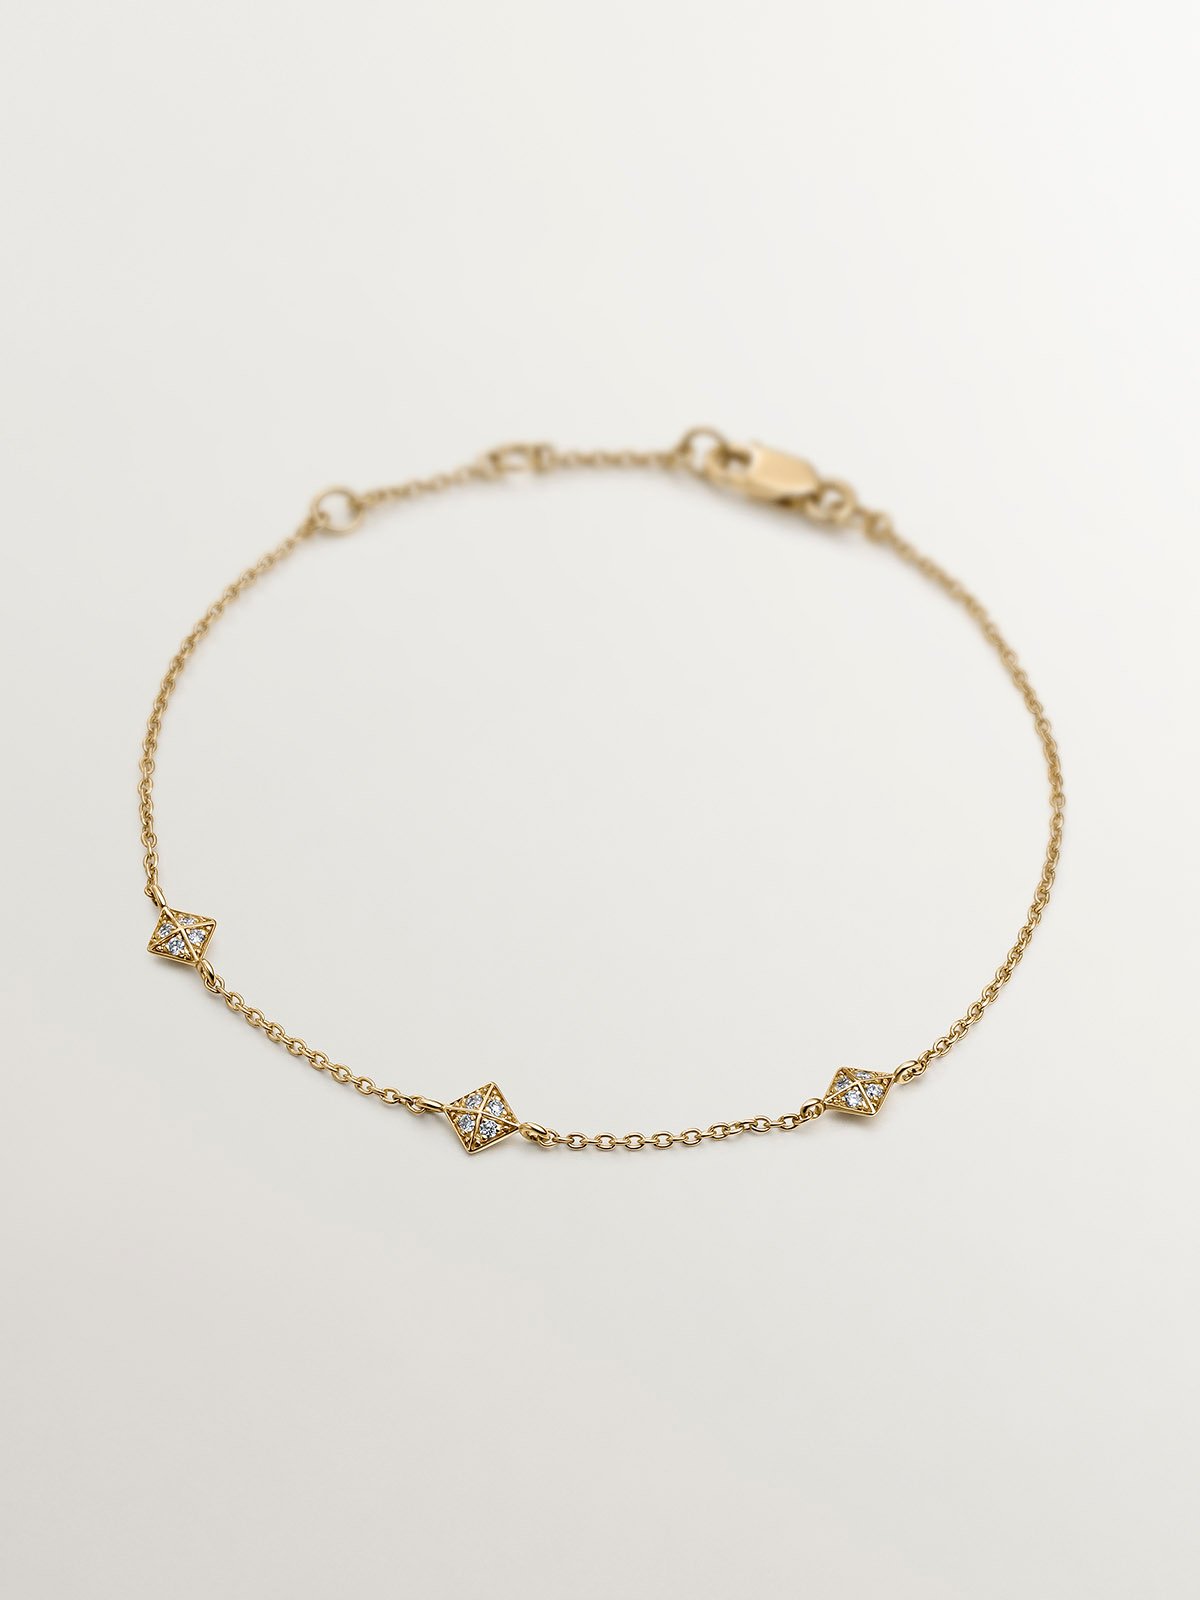 18K yellow gold bracelet with geometric shapes and diamonds